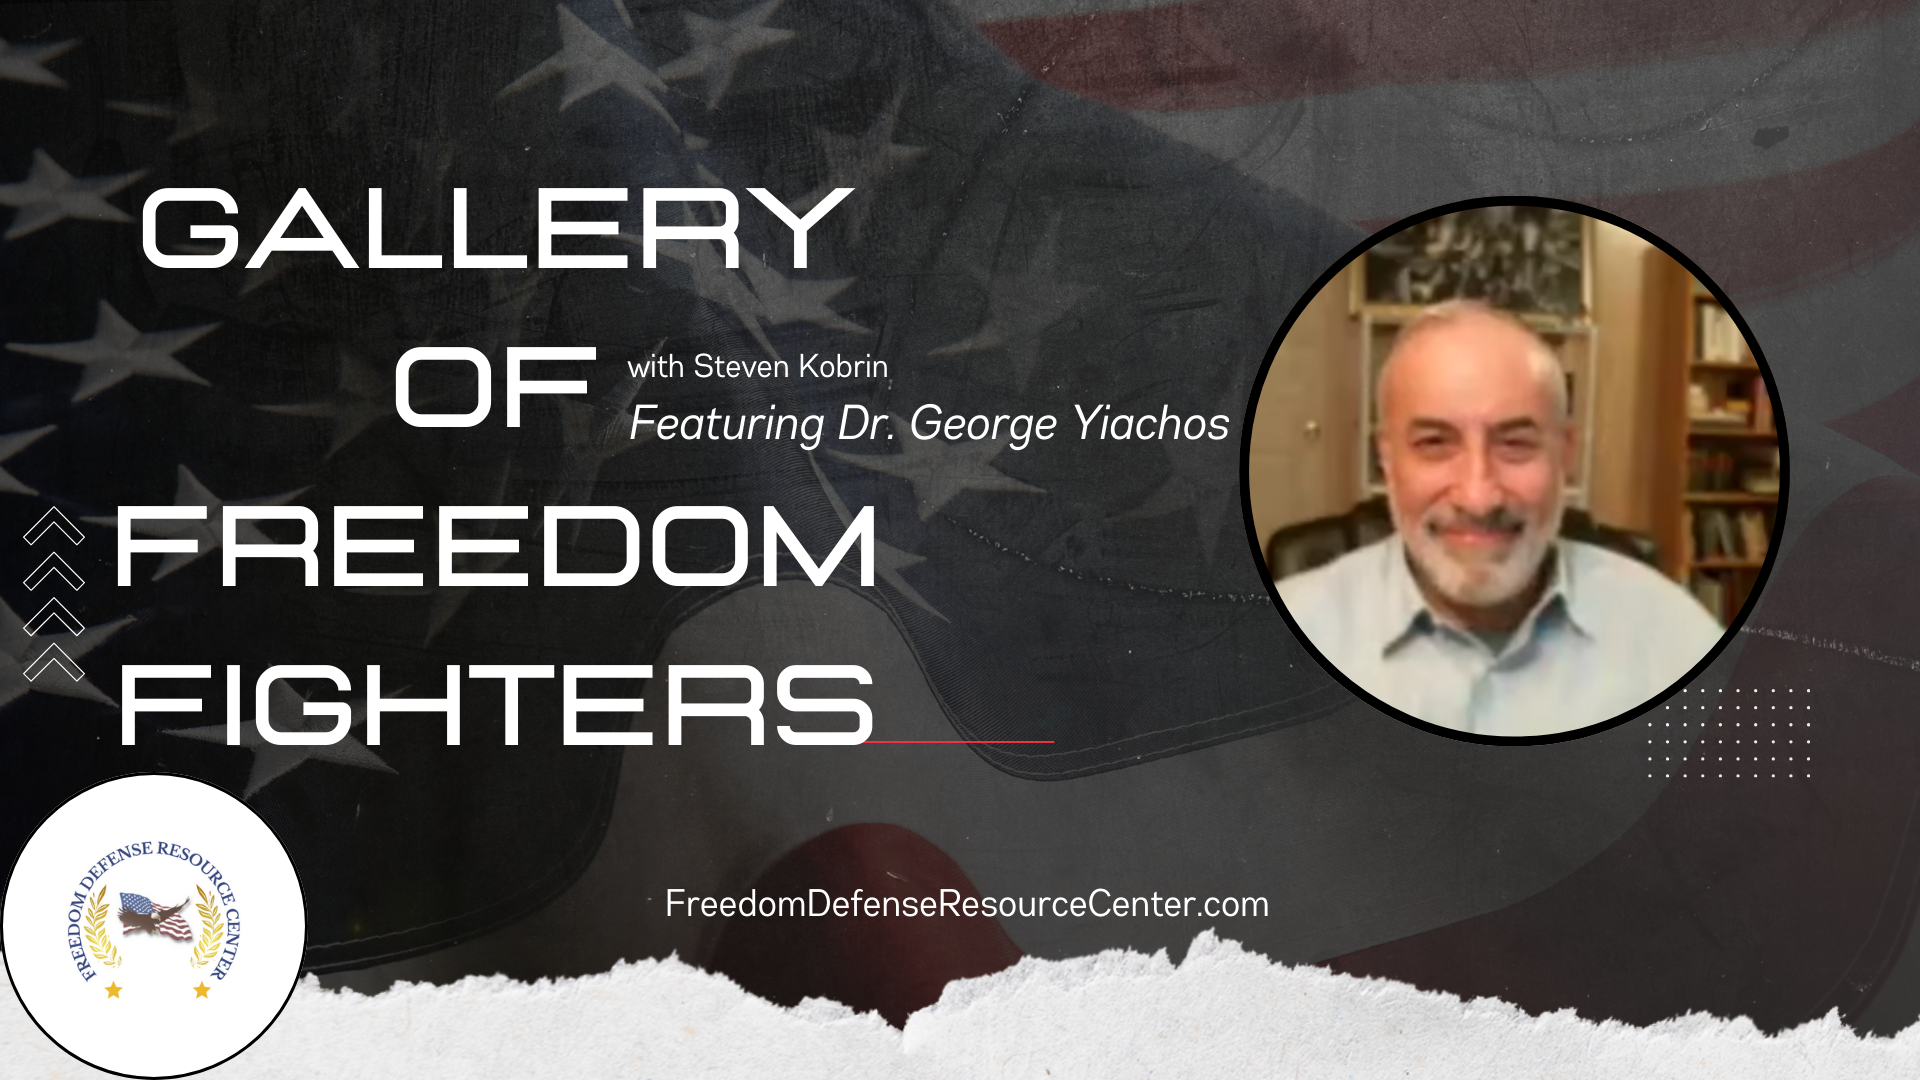 GFF59-Dr. George Yiachos - Gallery of Freedom Fighters